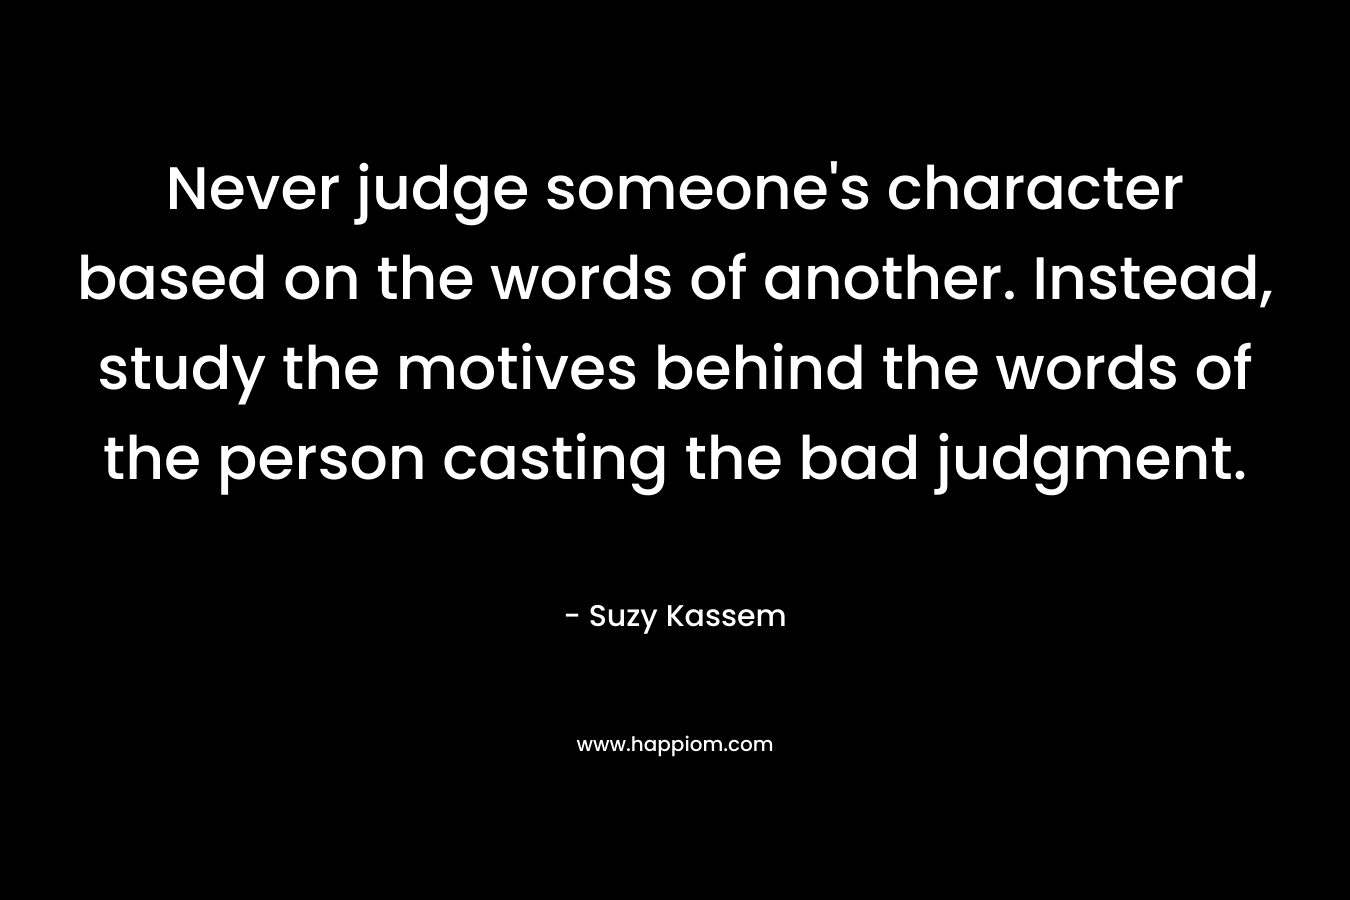 Never judge someone's character based on the words of another. Instead, study the motives behind the words of the person casting the bad judgment.